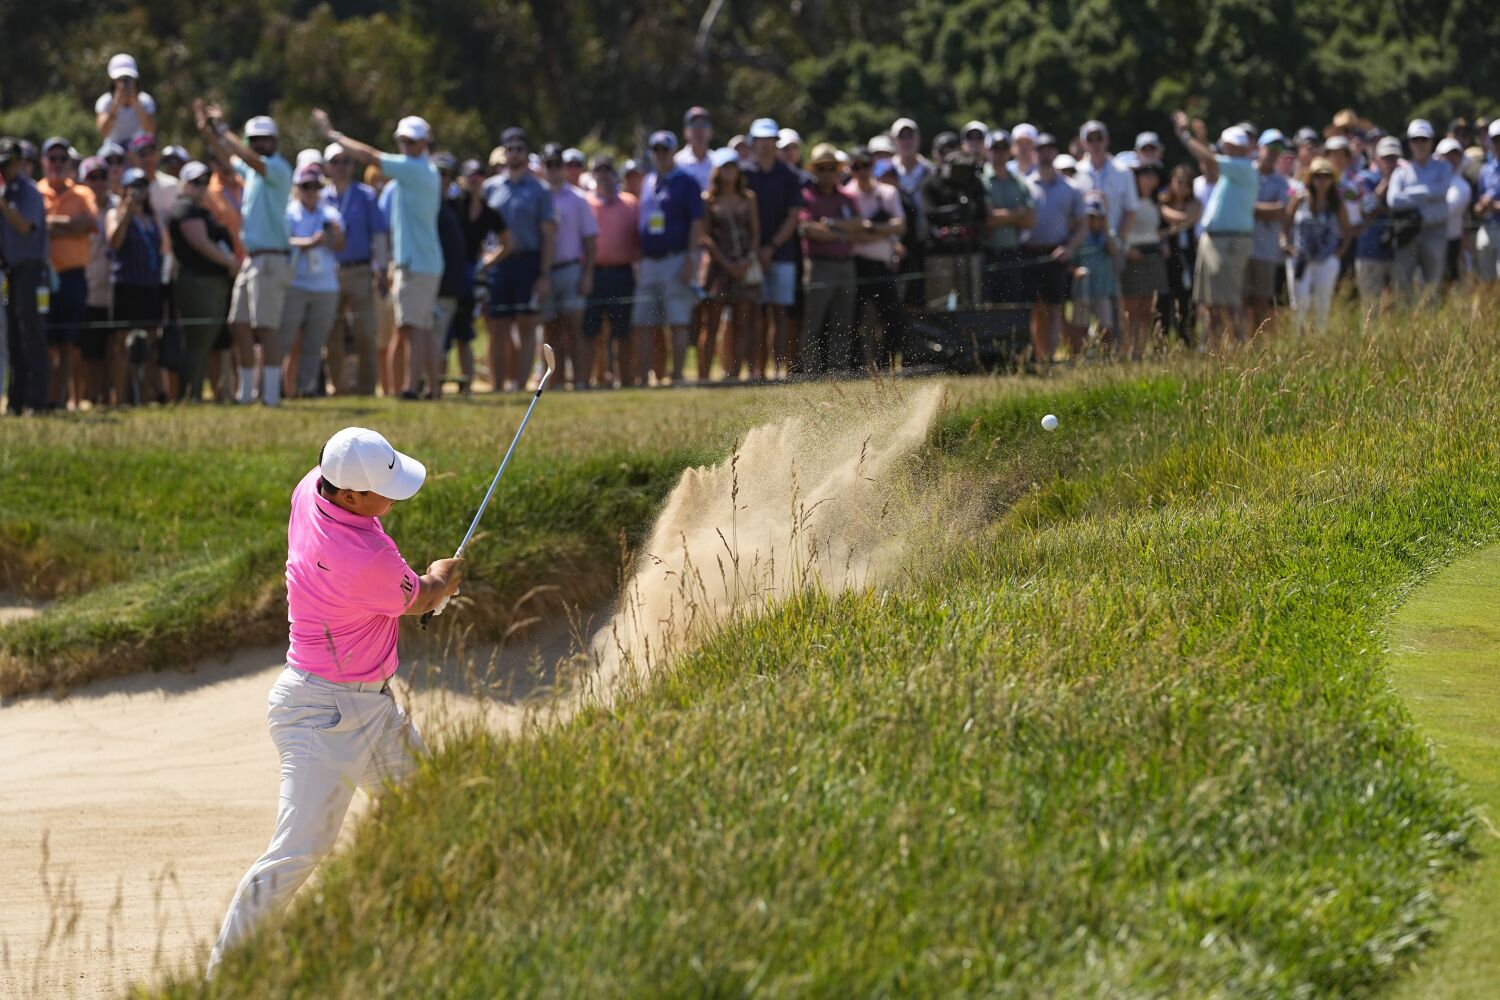 At U.S. Open, par-three 15th hole is short in distance but long on consternation